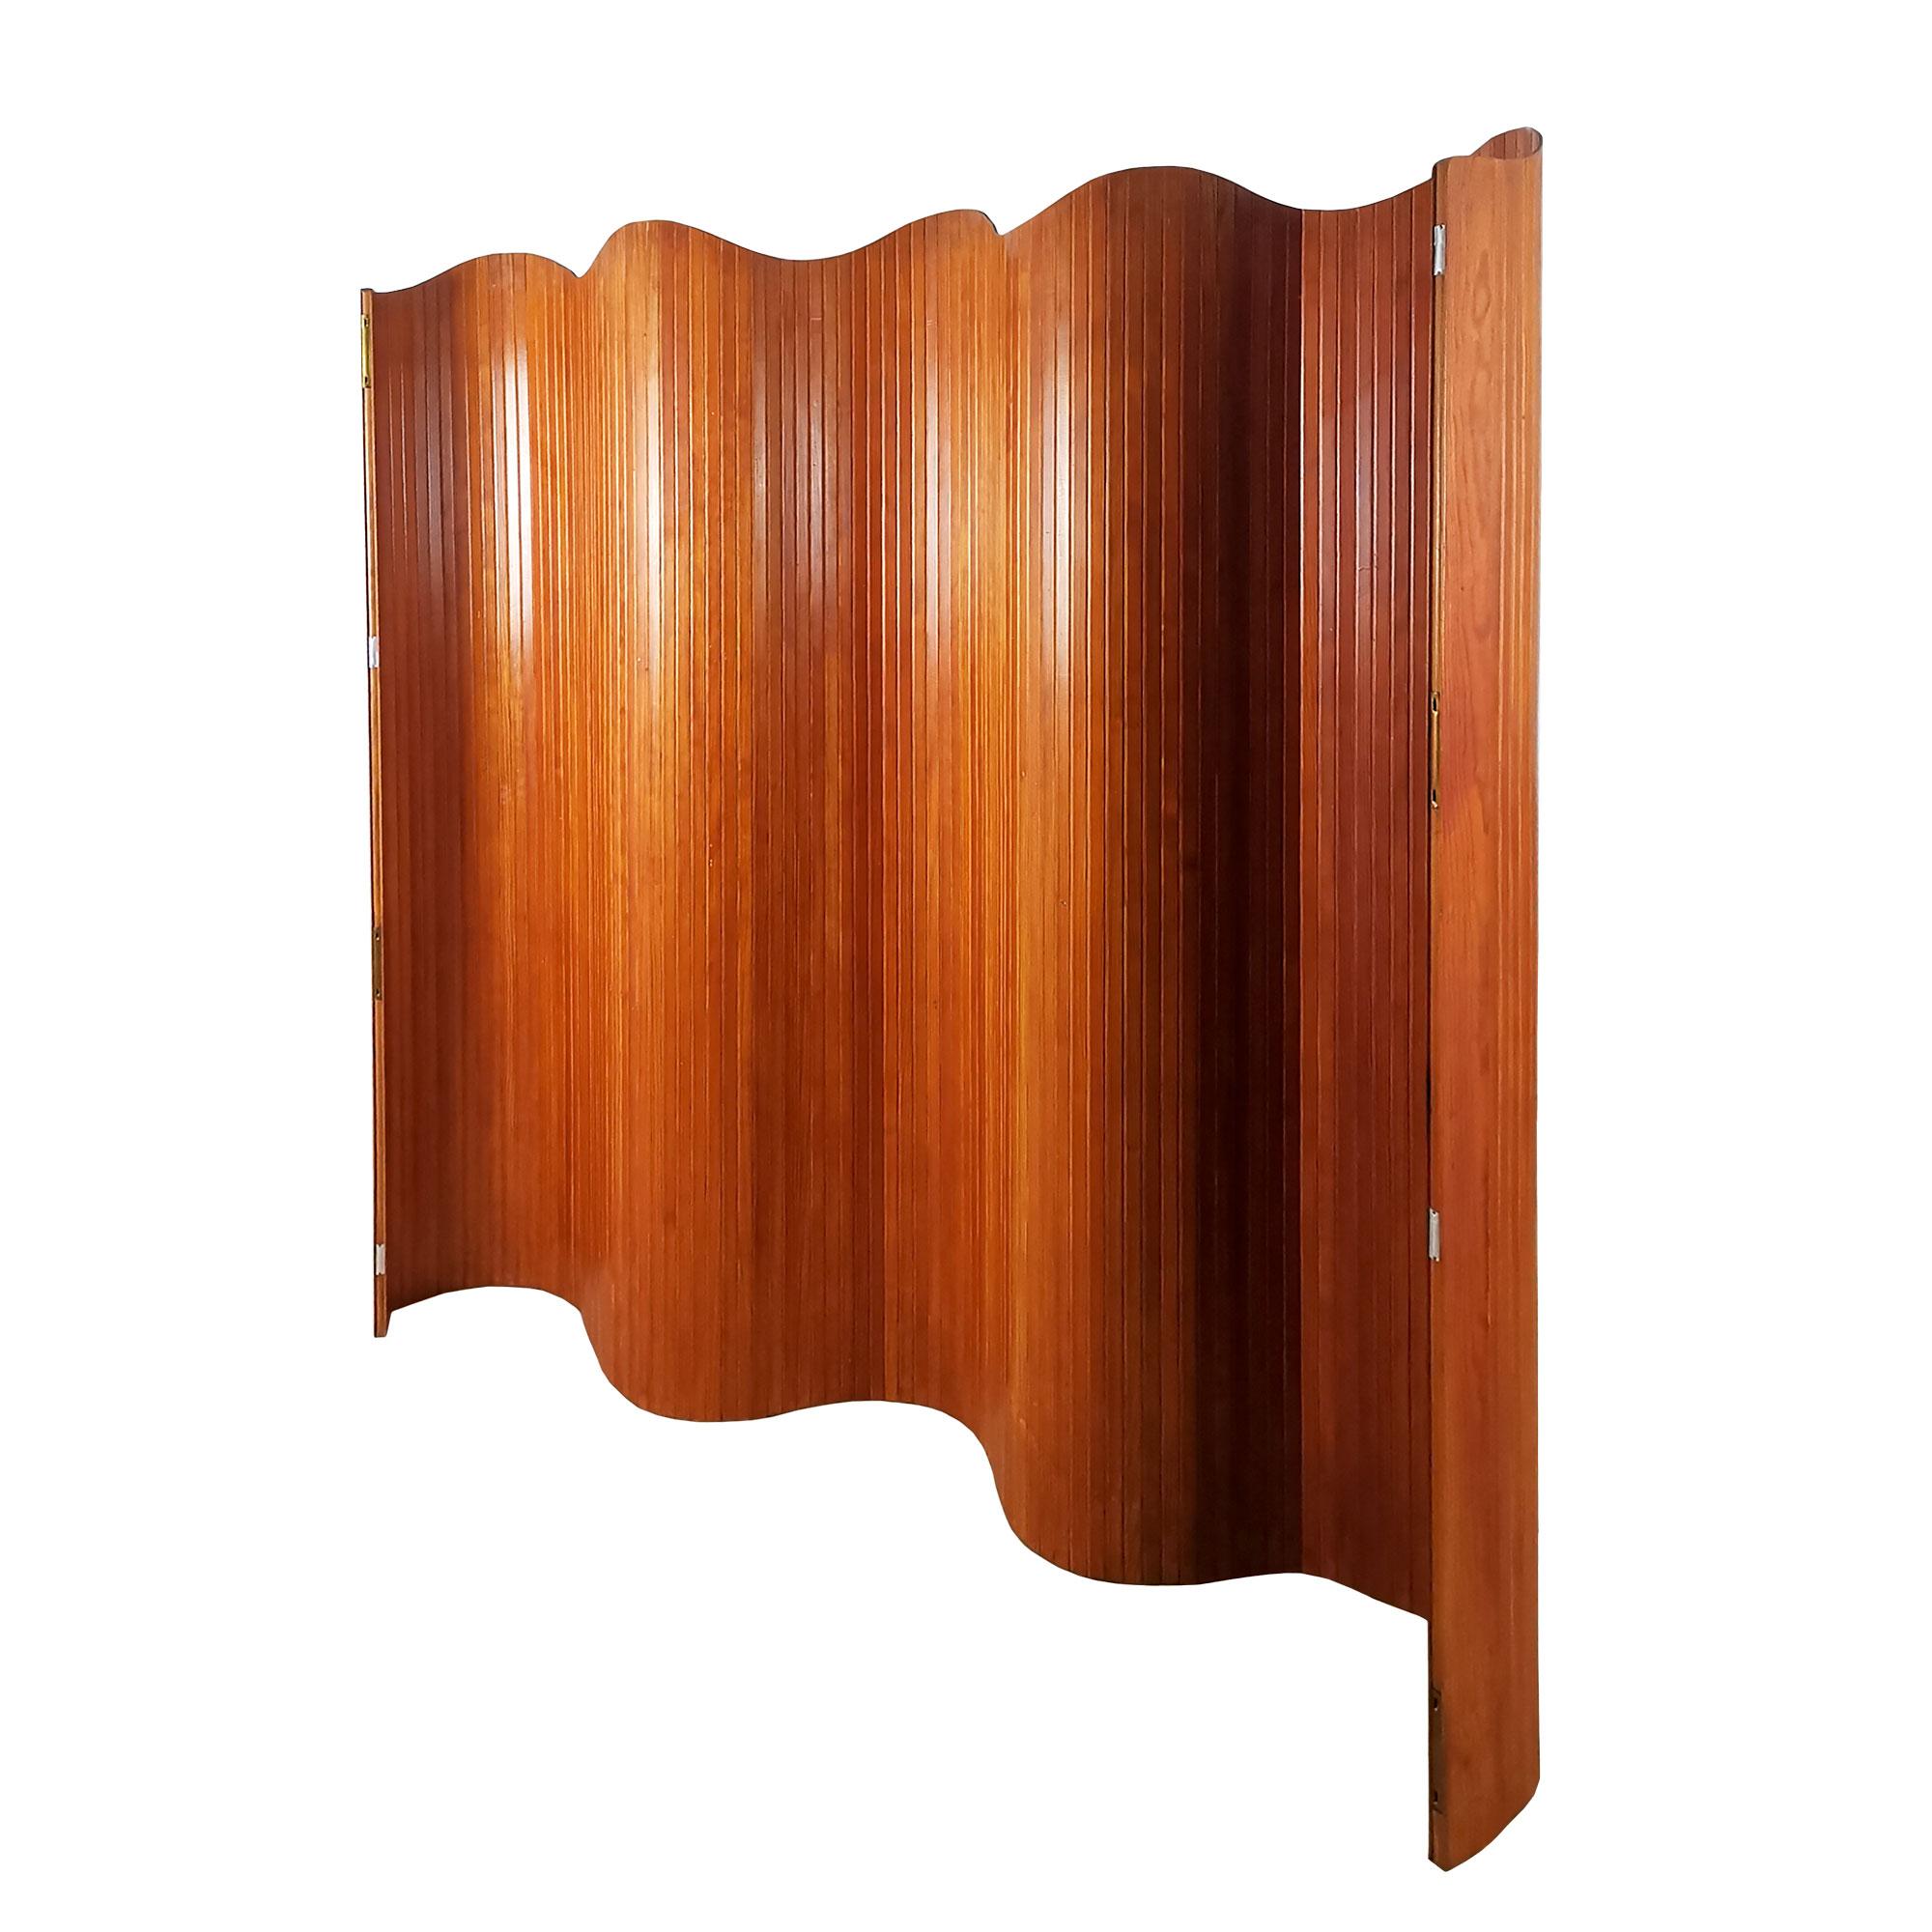 Large roller screen in pitch pine laths, united by internal metal cables, which can be used as a fitting room. Impeccable original varnish.
Manufacturer’s plate: Manufrance, Saint-Etienne.
France c. 1940.